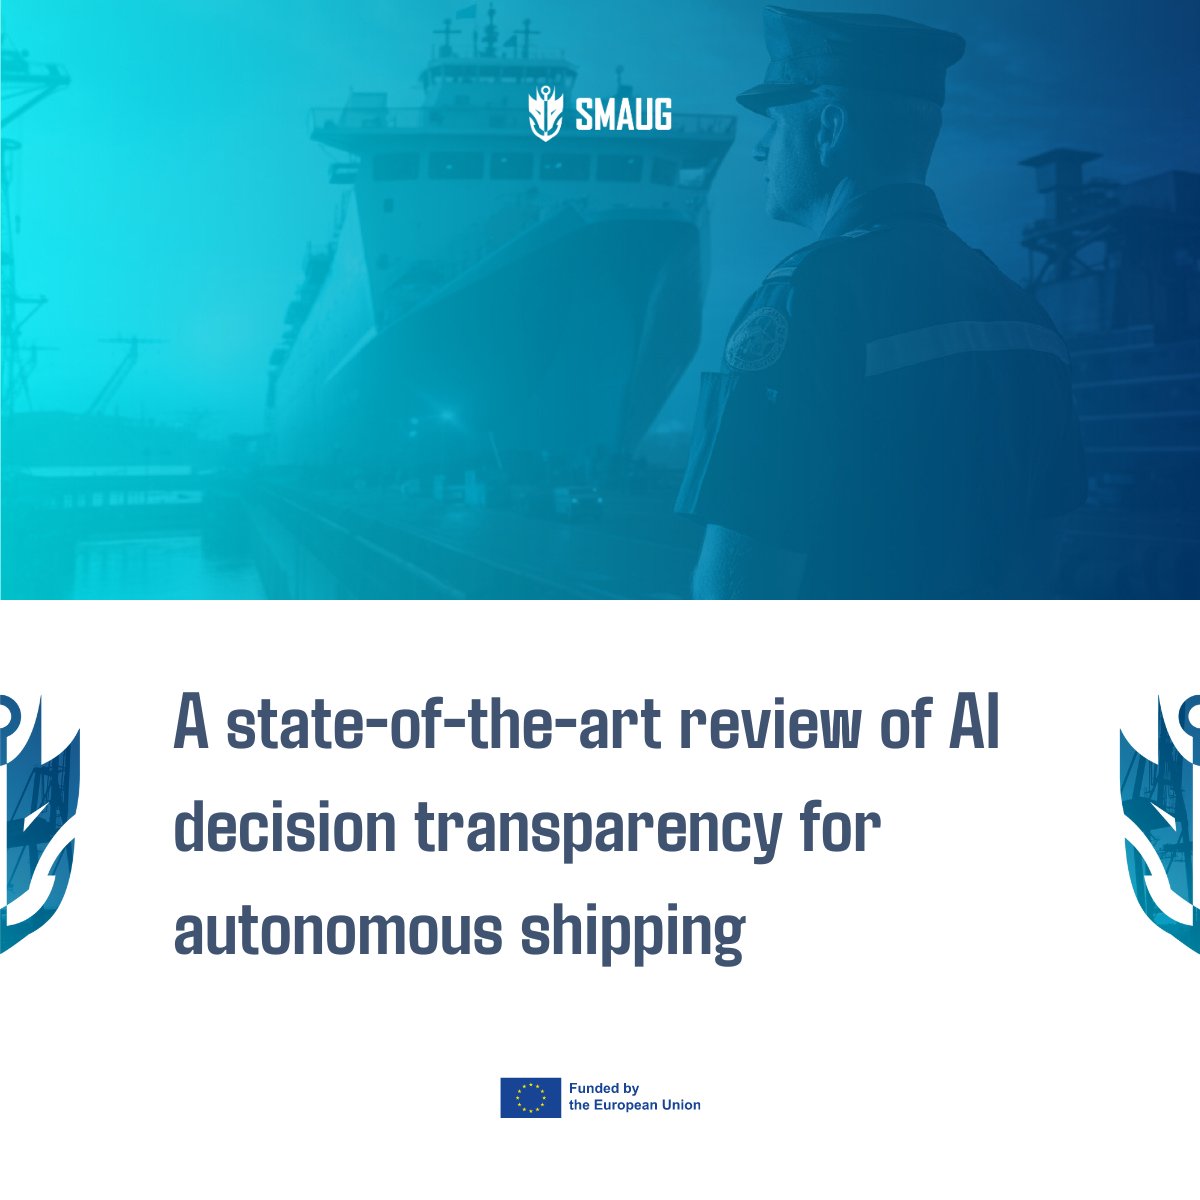 📢 Wednesday reading!
Autonomous shipping & AI! 🚤
🔹 Read the article ''A state-of-the-art review of AI decision transparency for autonomous shipping'' to reveal the full story!
tandfonline.com/doi/full/10.10…
#smaugEU #underwaterdetection #horizoneurope #maritimesecurity